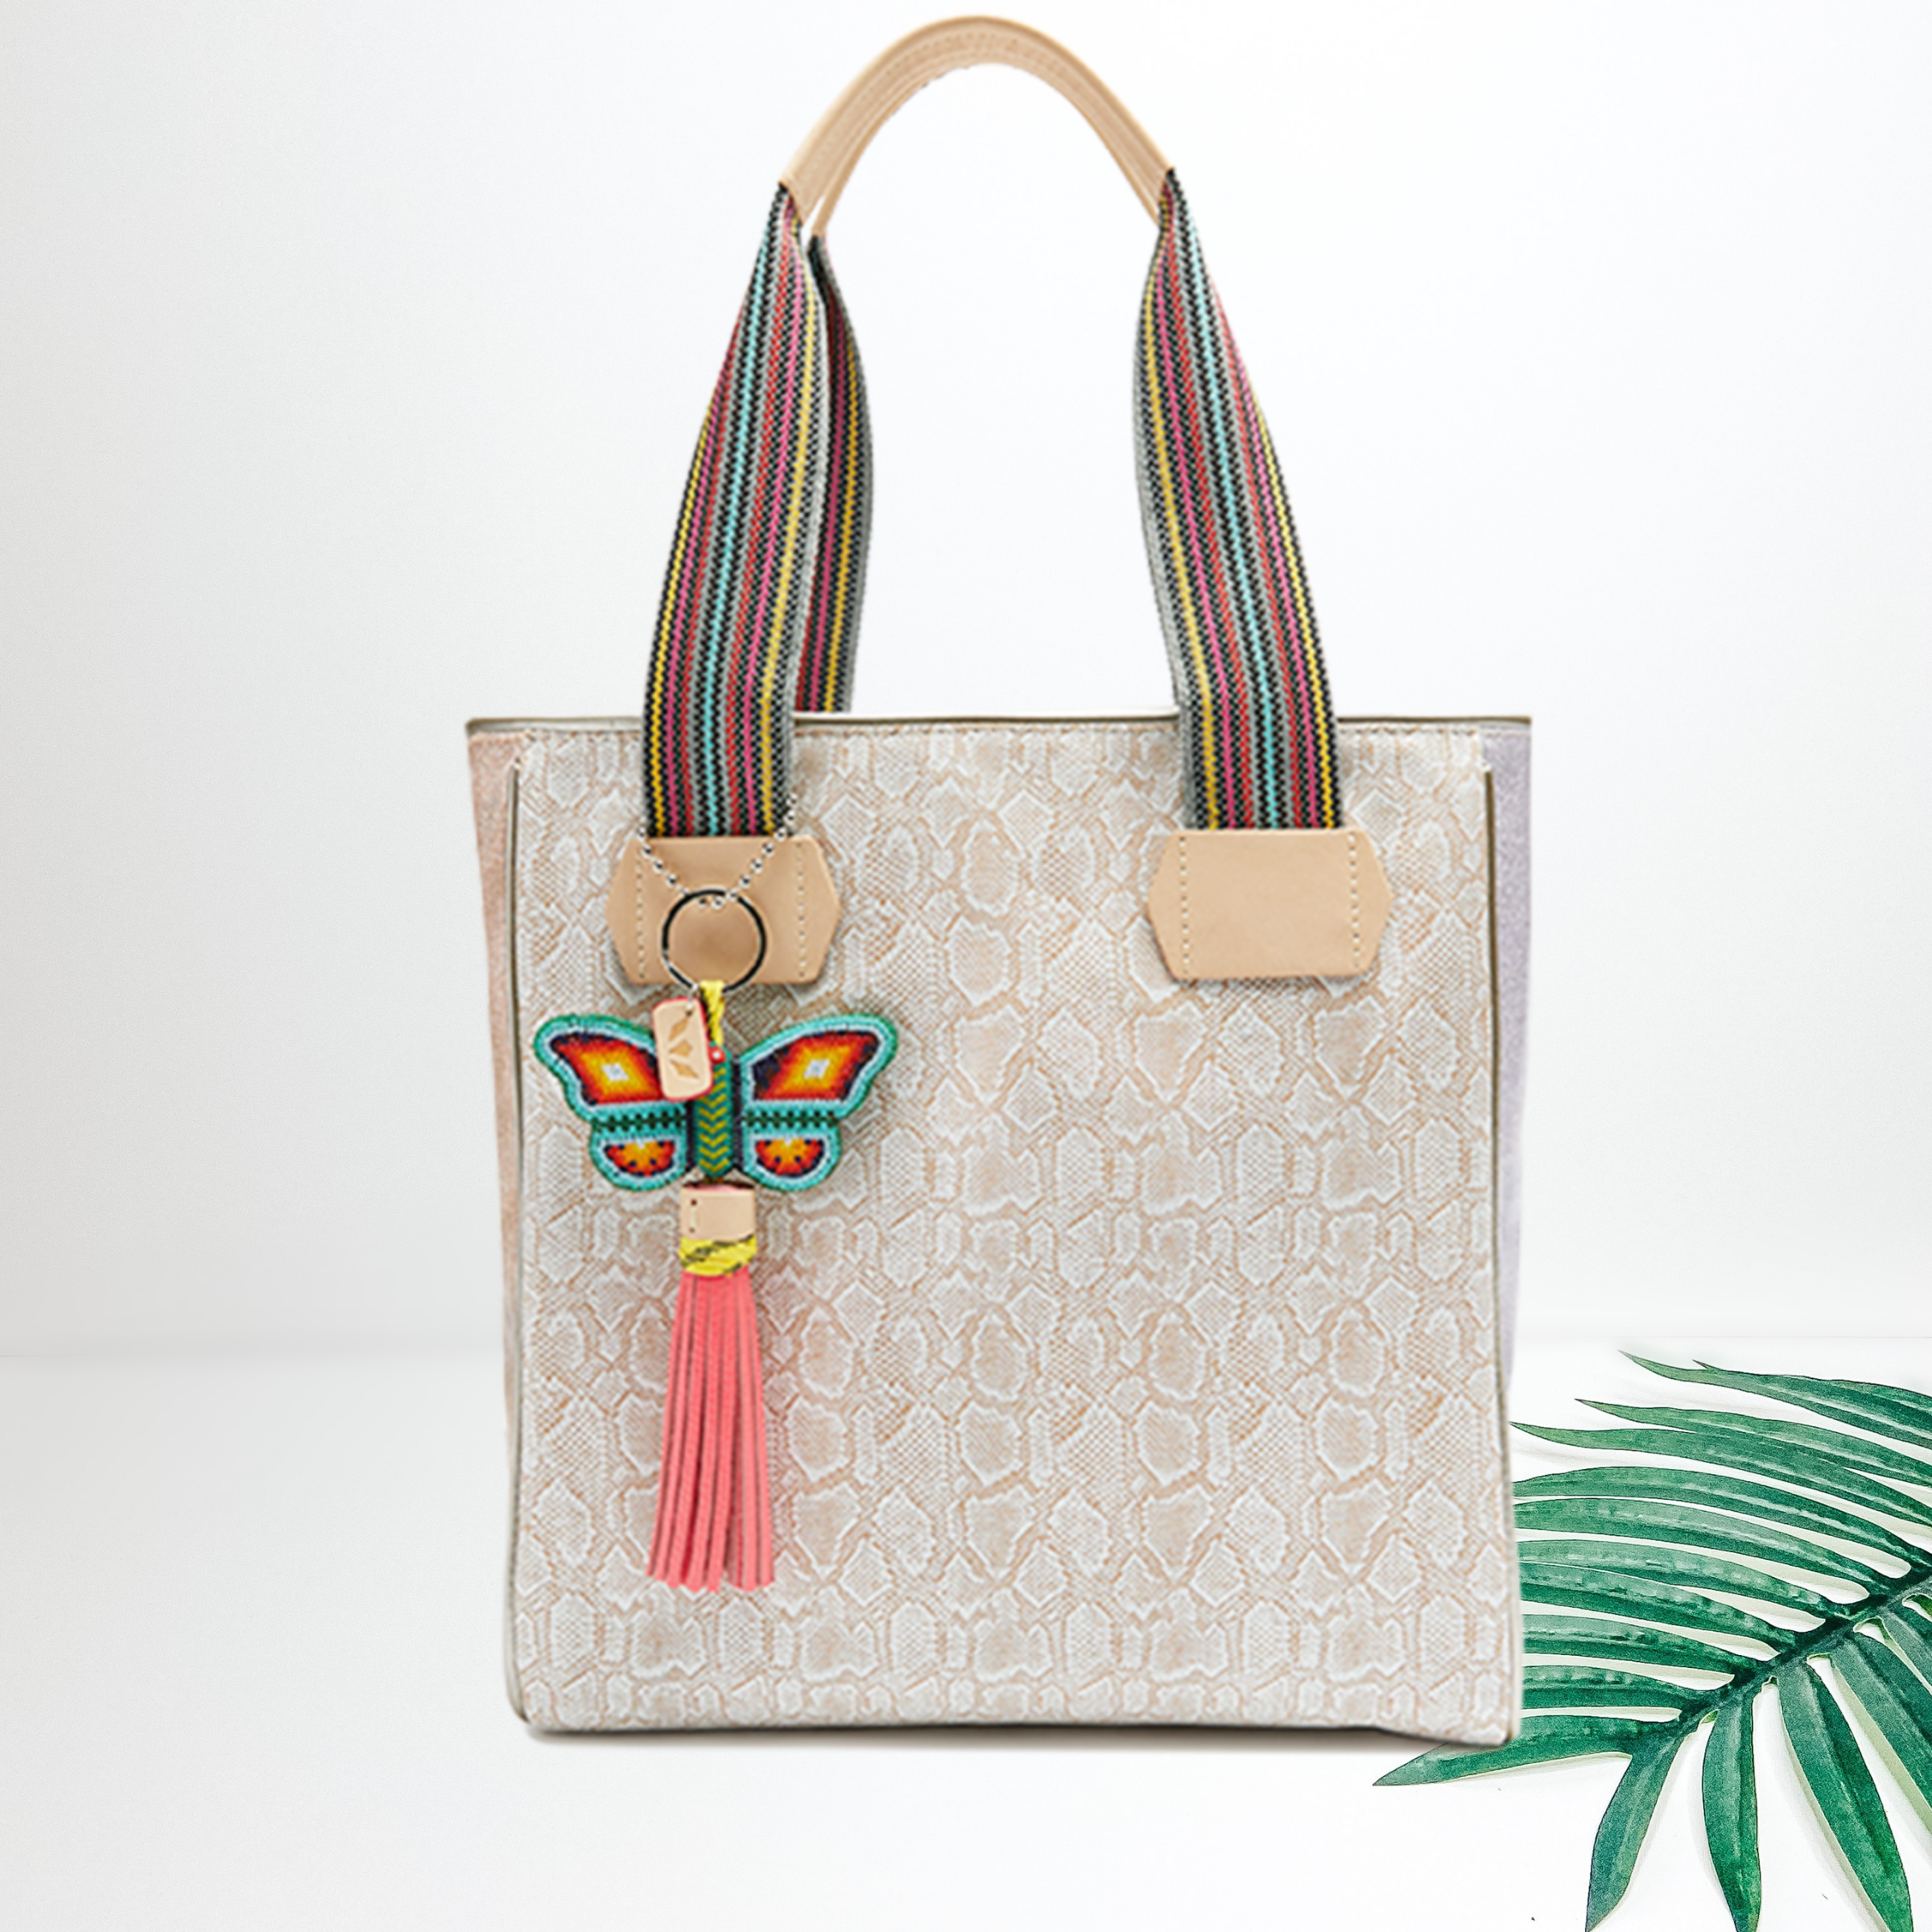 In the middle of the picture is a cream colored snake sin tote with a pink tassel butterfly charm. To the right of the tote is a green palm left on a white background.